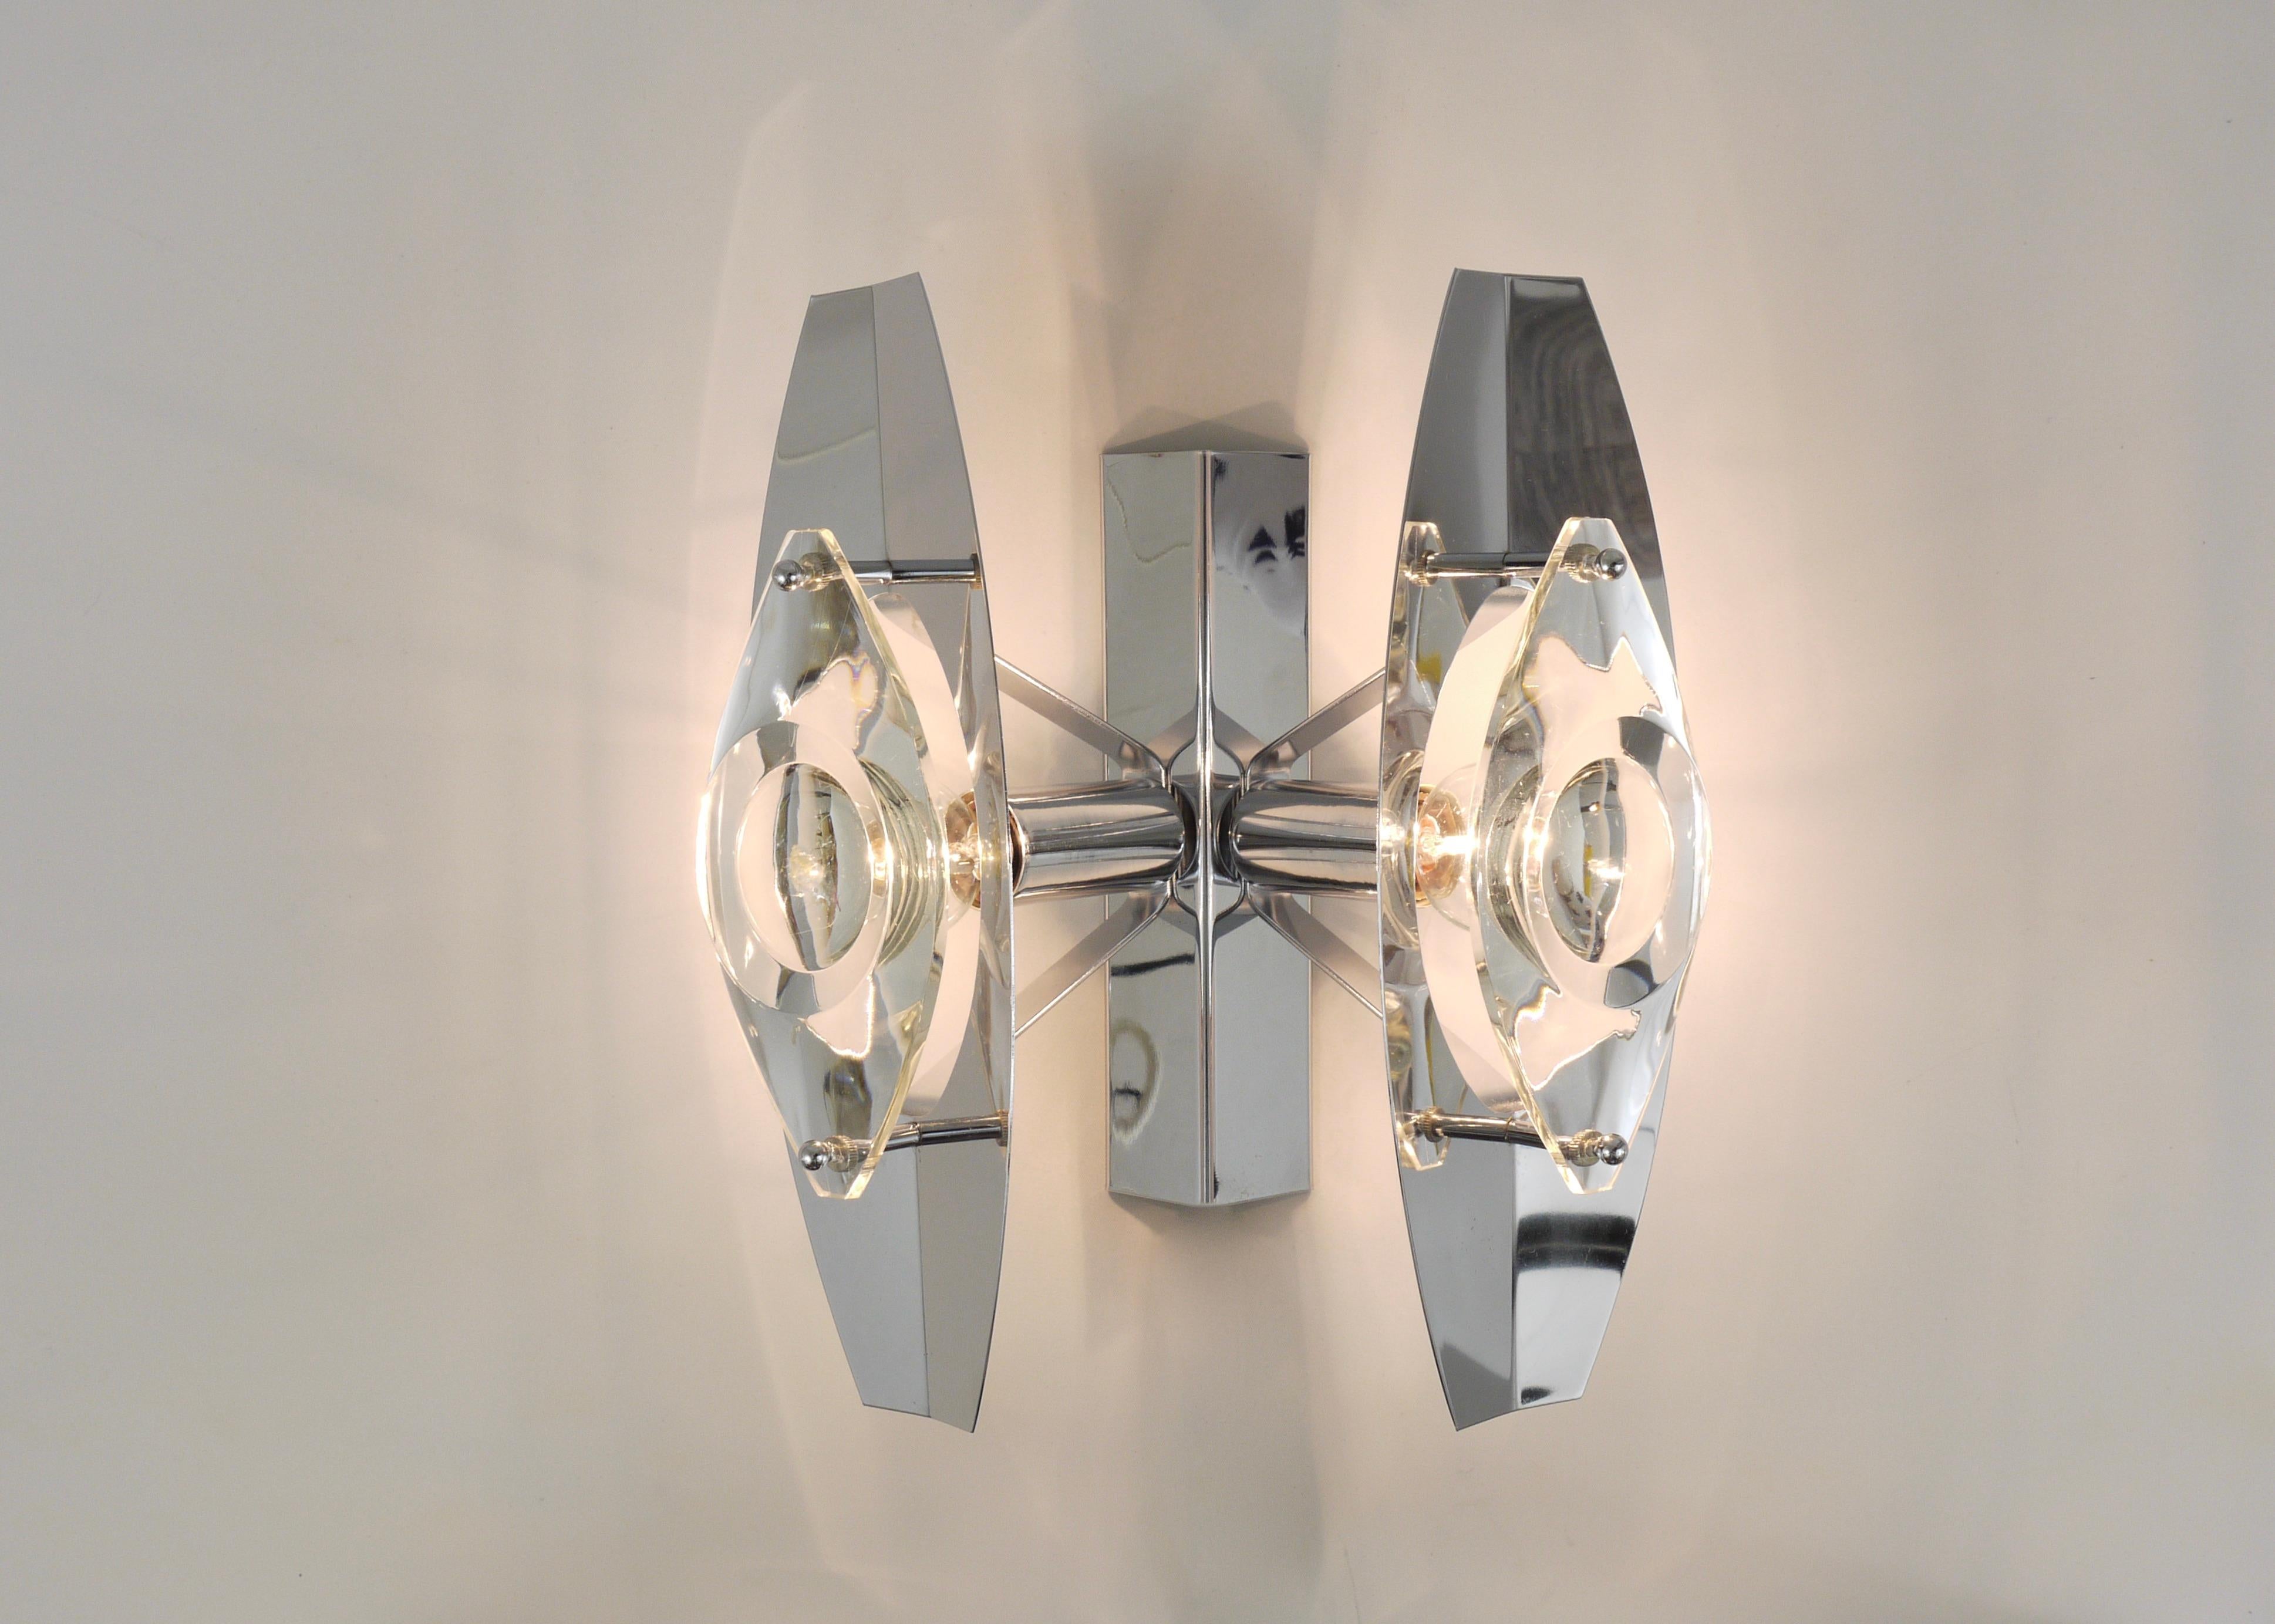 A beautiful large double wall light from the 1970s by Gaetano Sciolari with two light sources. Made of chrome-plated metal with stylish eye-shaped magnifying crystal glass shields. In excellent condition.